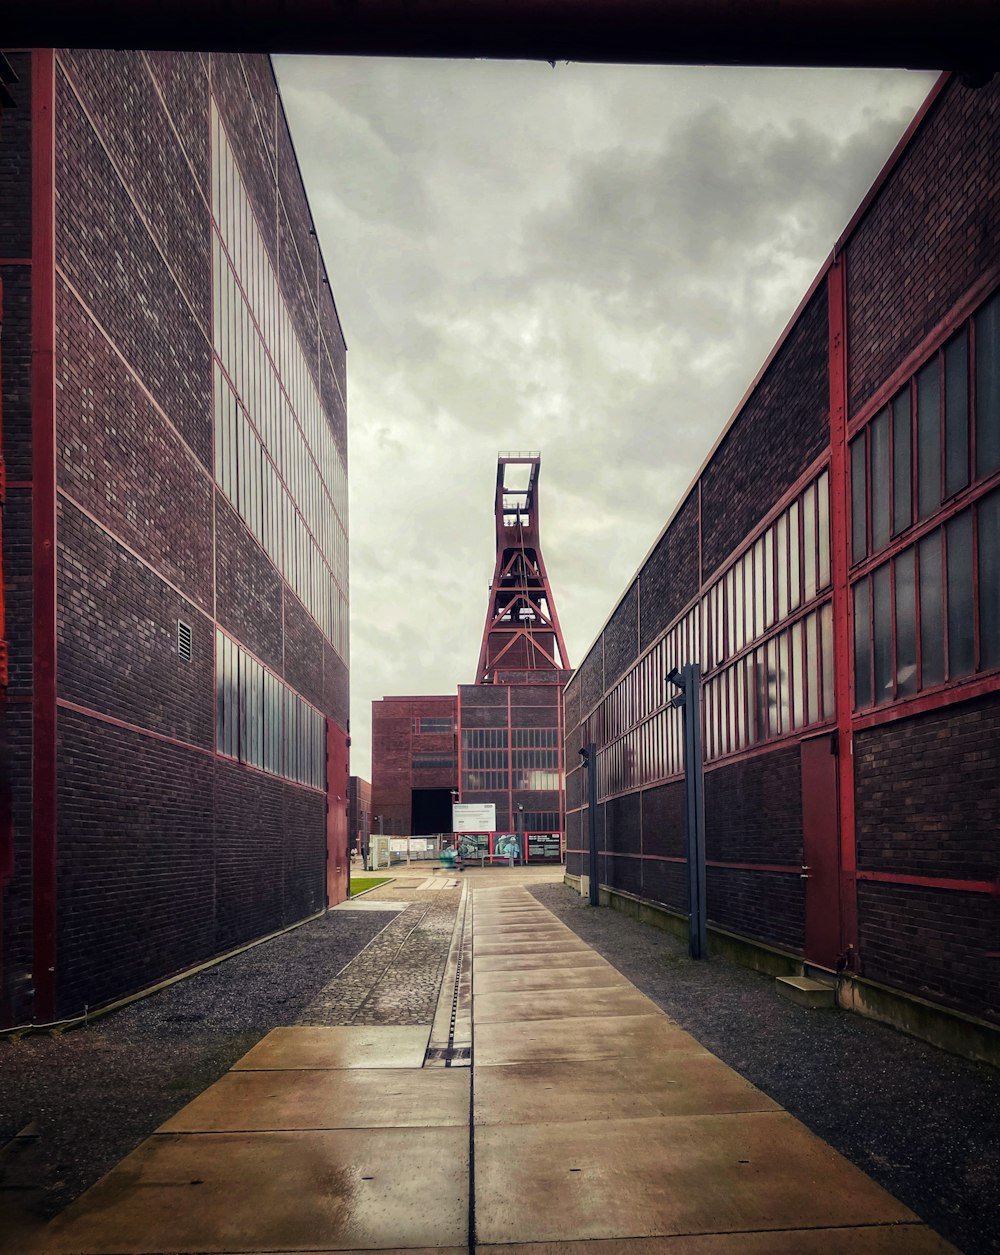 a walkway between two brick buildings on a cloudy day